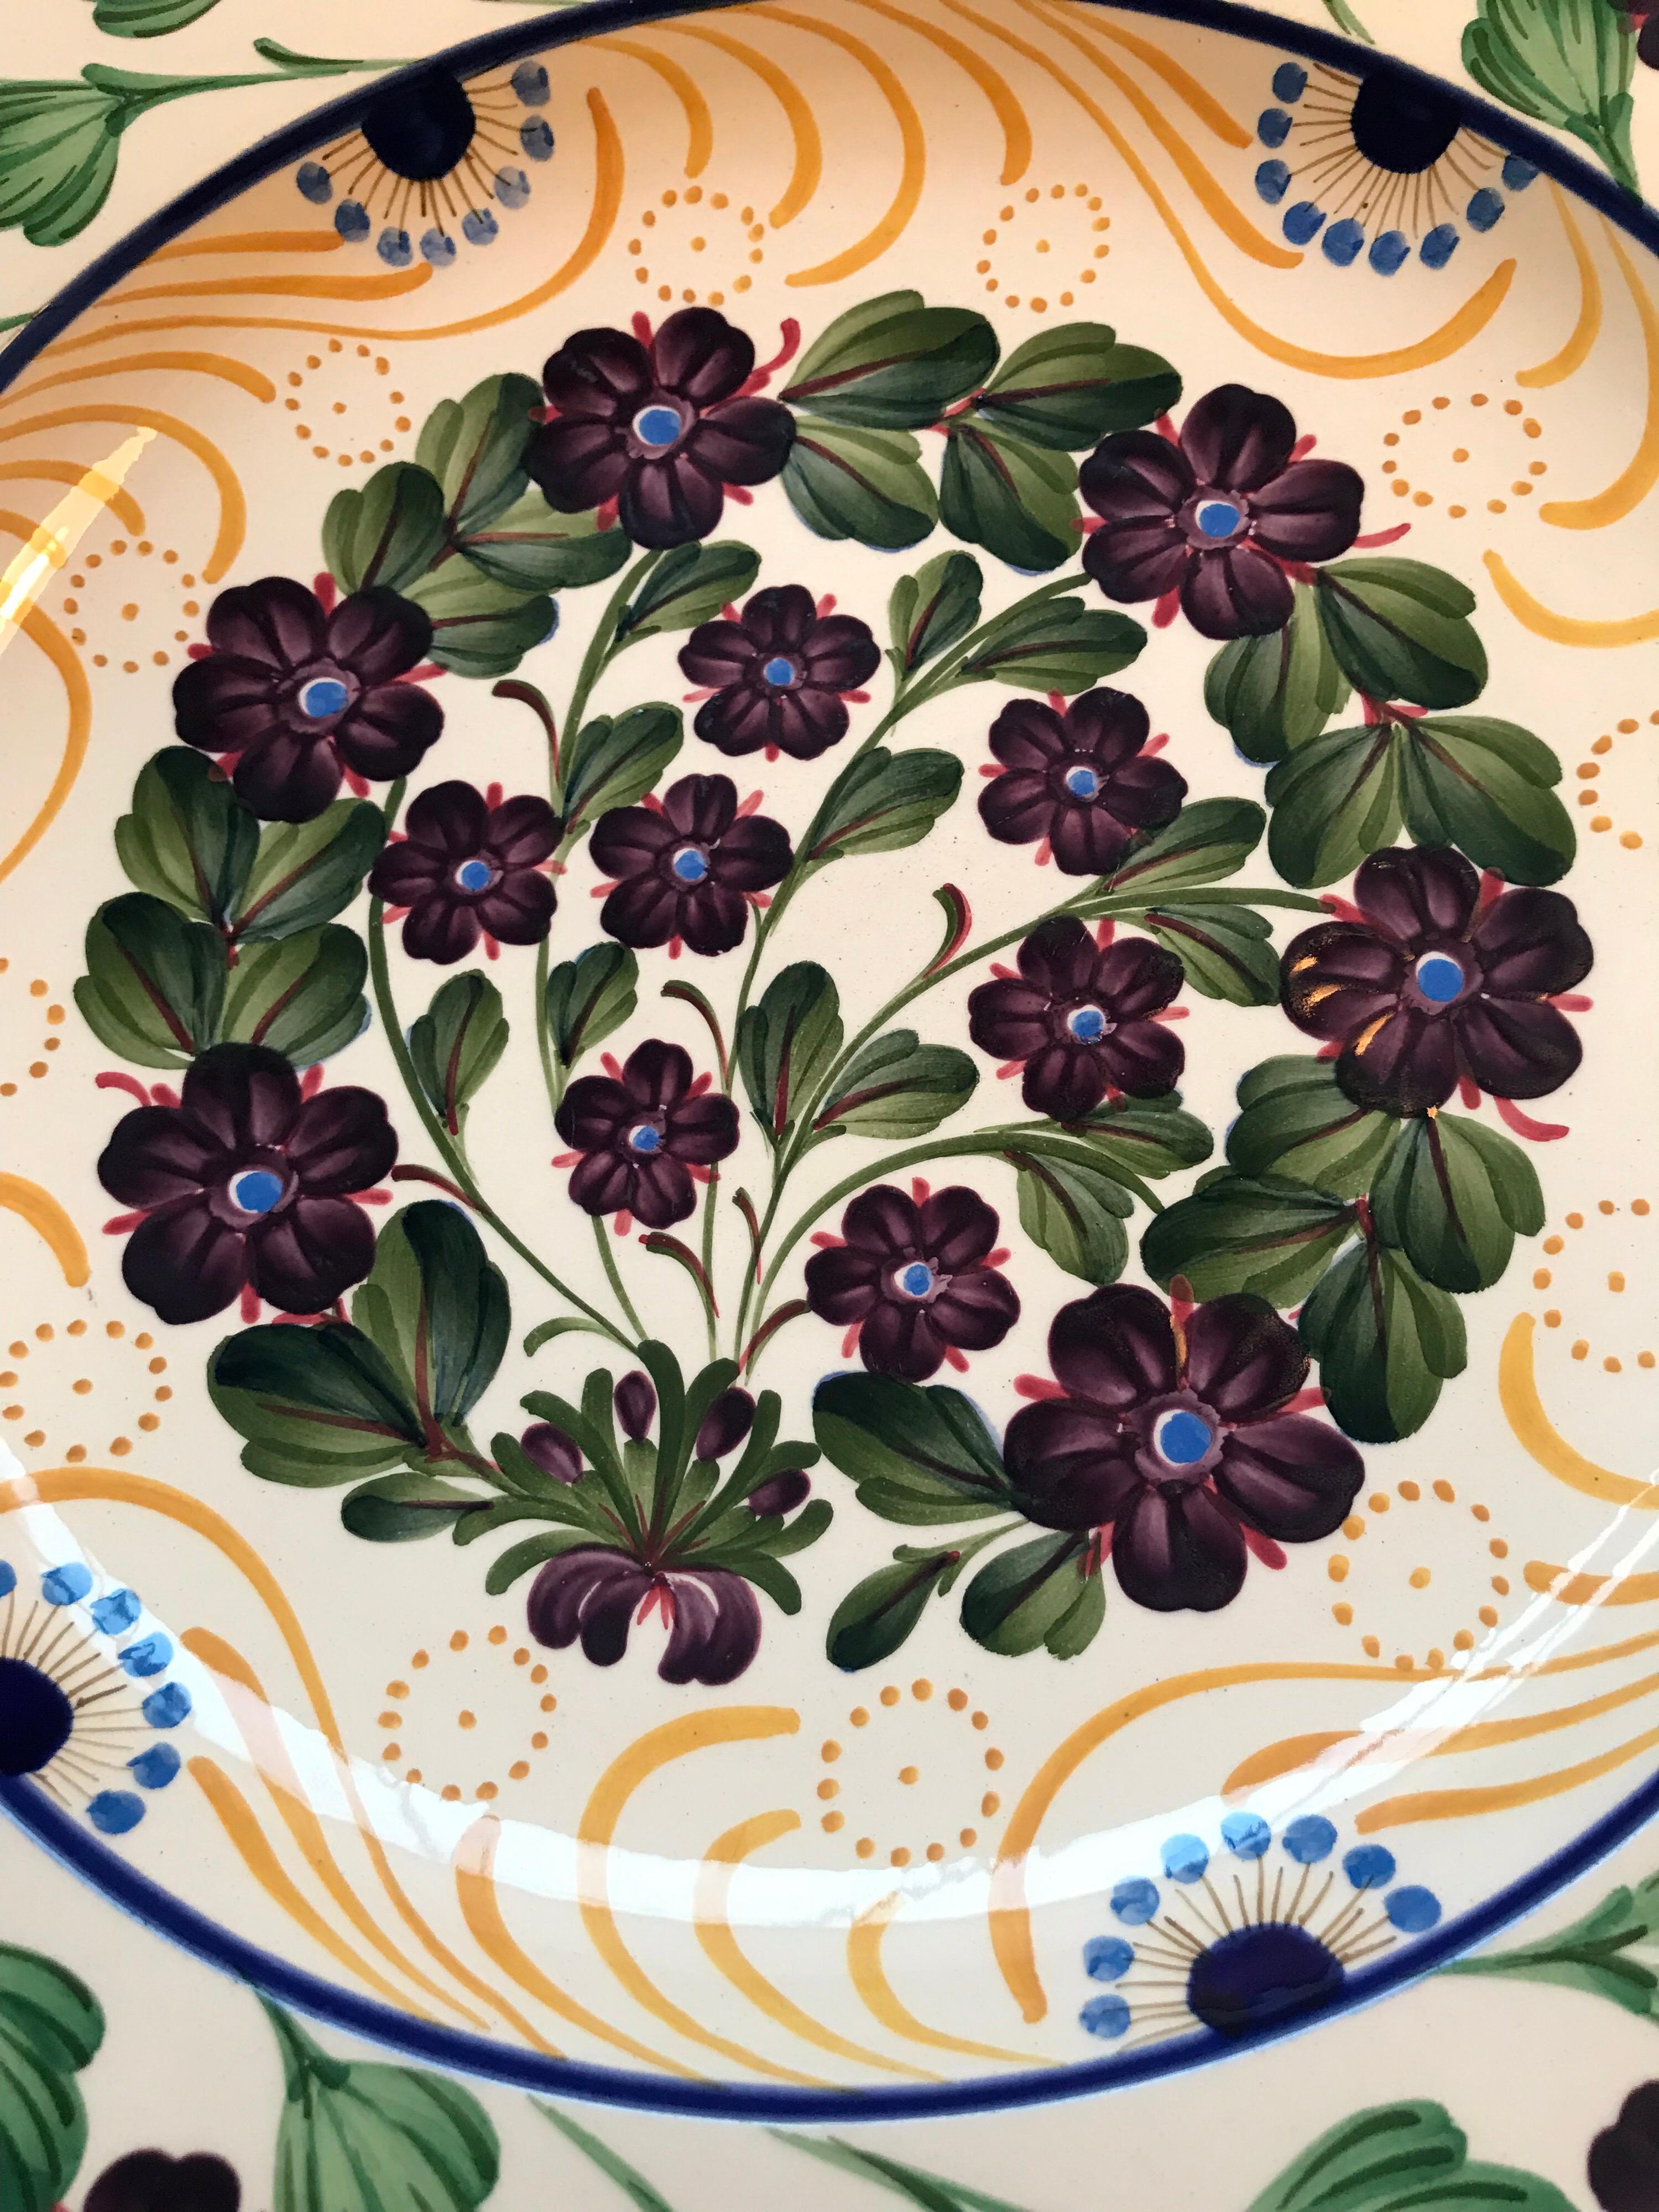 Large and rare 18” antique bowl platter by Aluminia of Copenhagen from circa 1910
Gorgeous hand painted floral Anemone design
Vibrant colors and a beautiful piece of faience that can change a room
Two hair line cracks 2 inches long from the edge